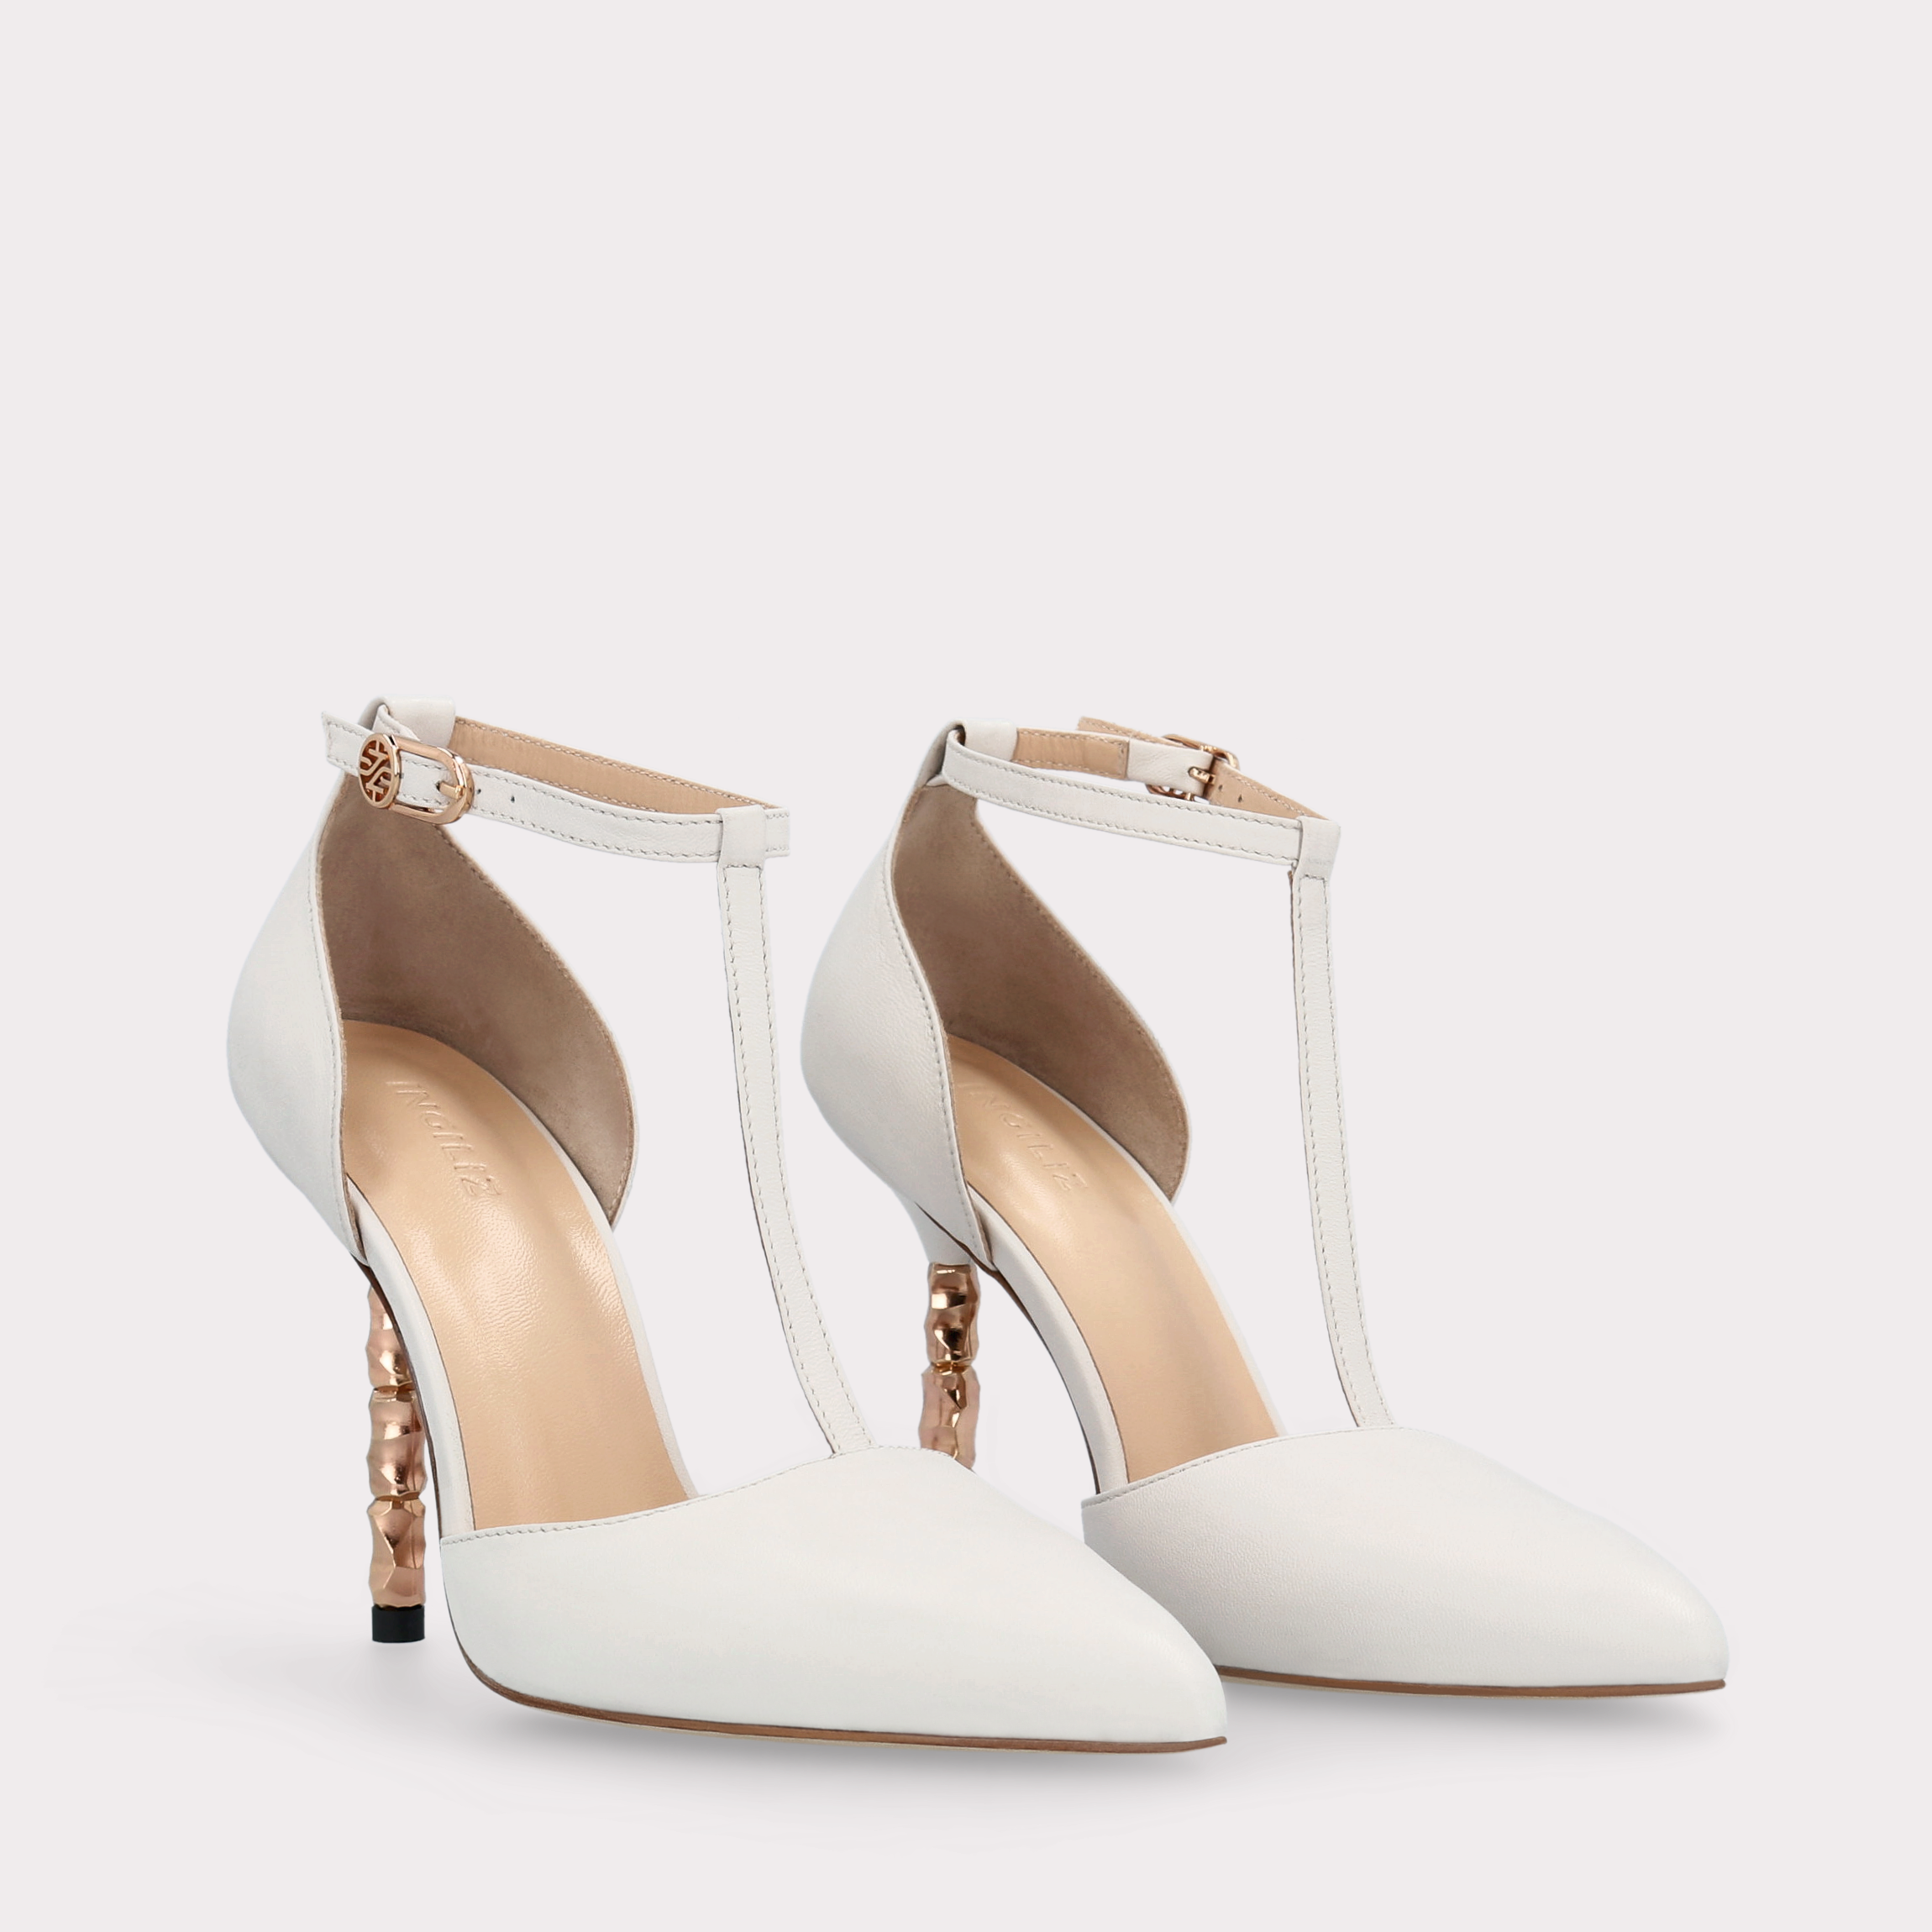 ASTRID 101 IVORY LEATHER PUMPS